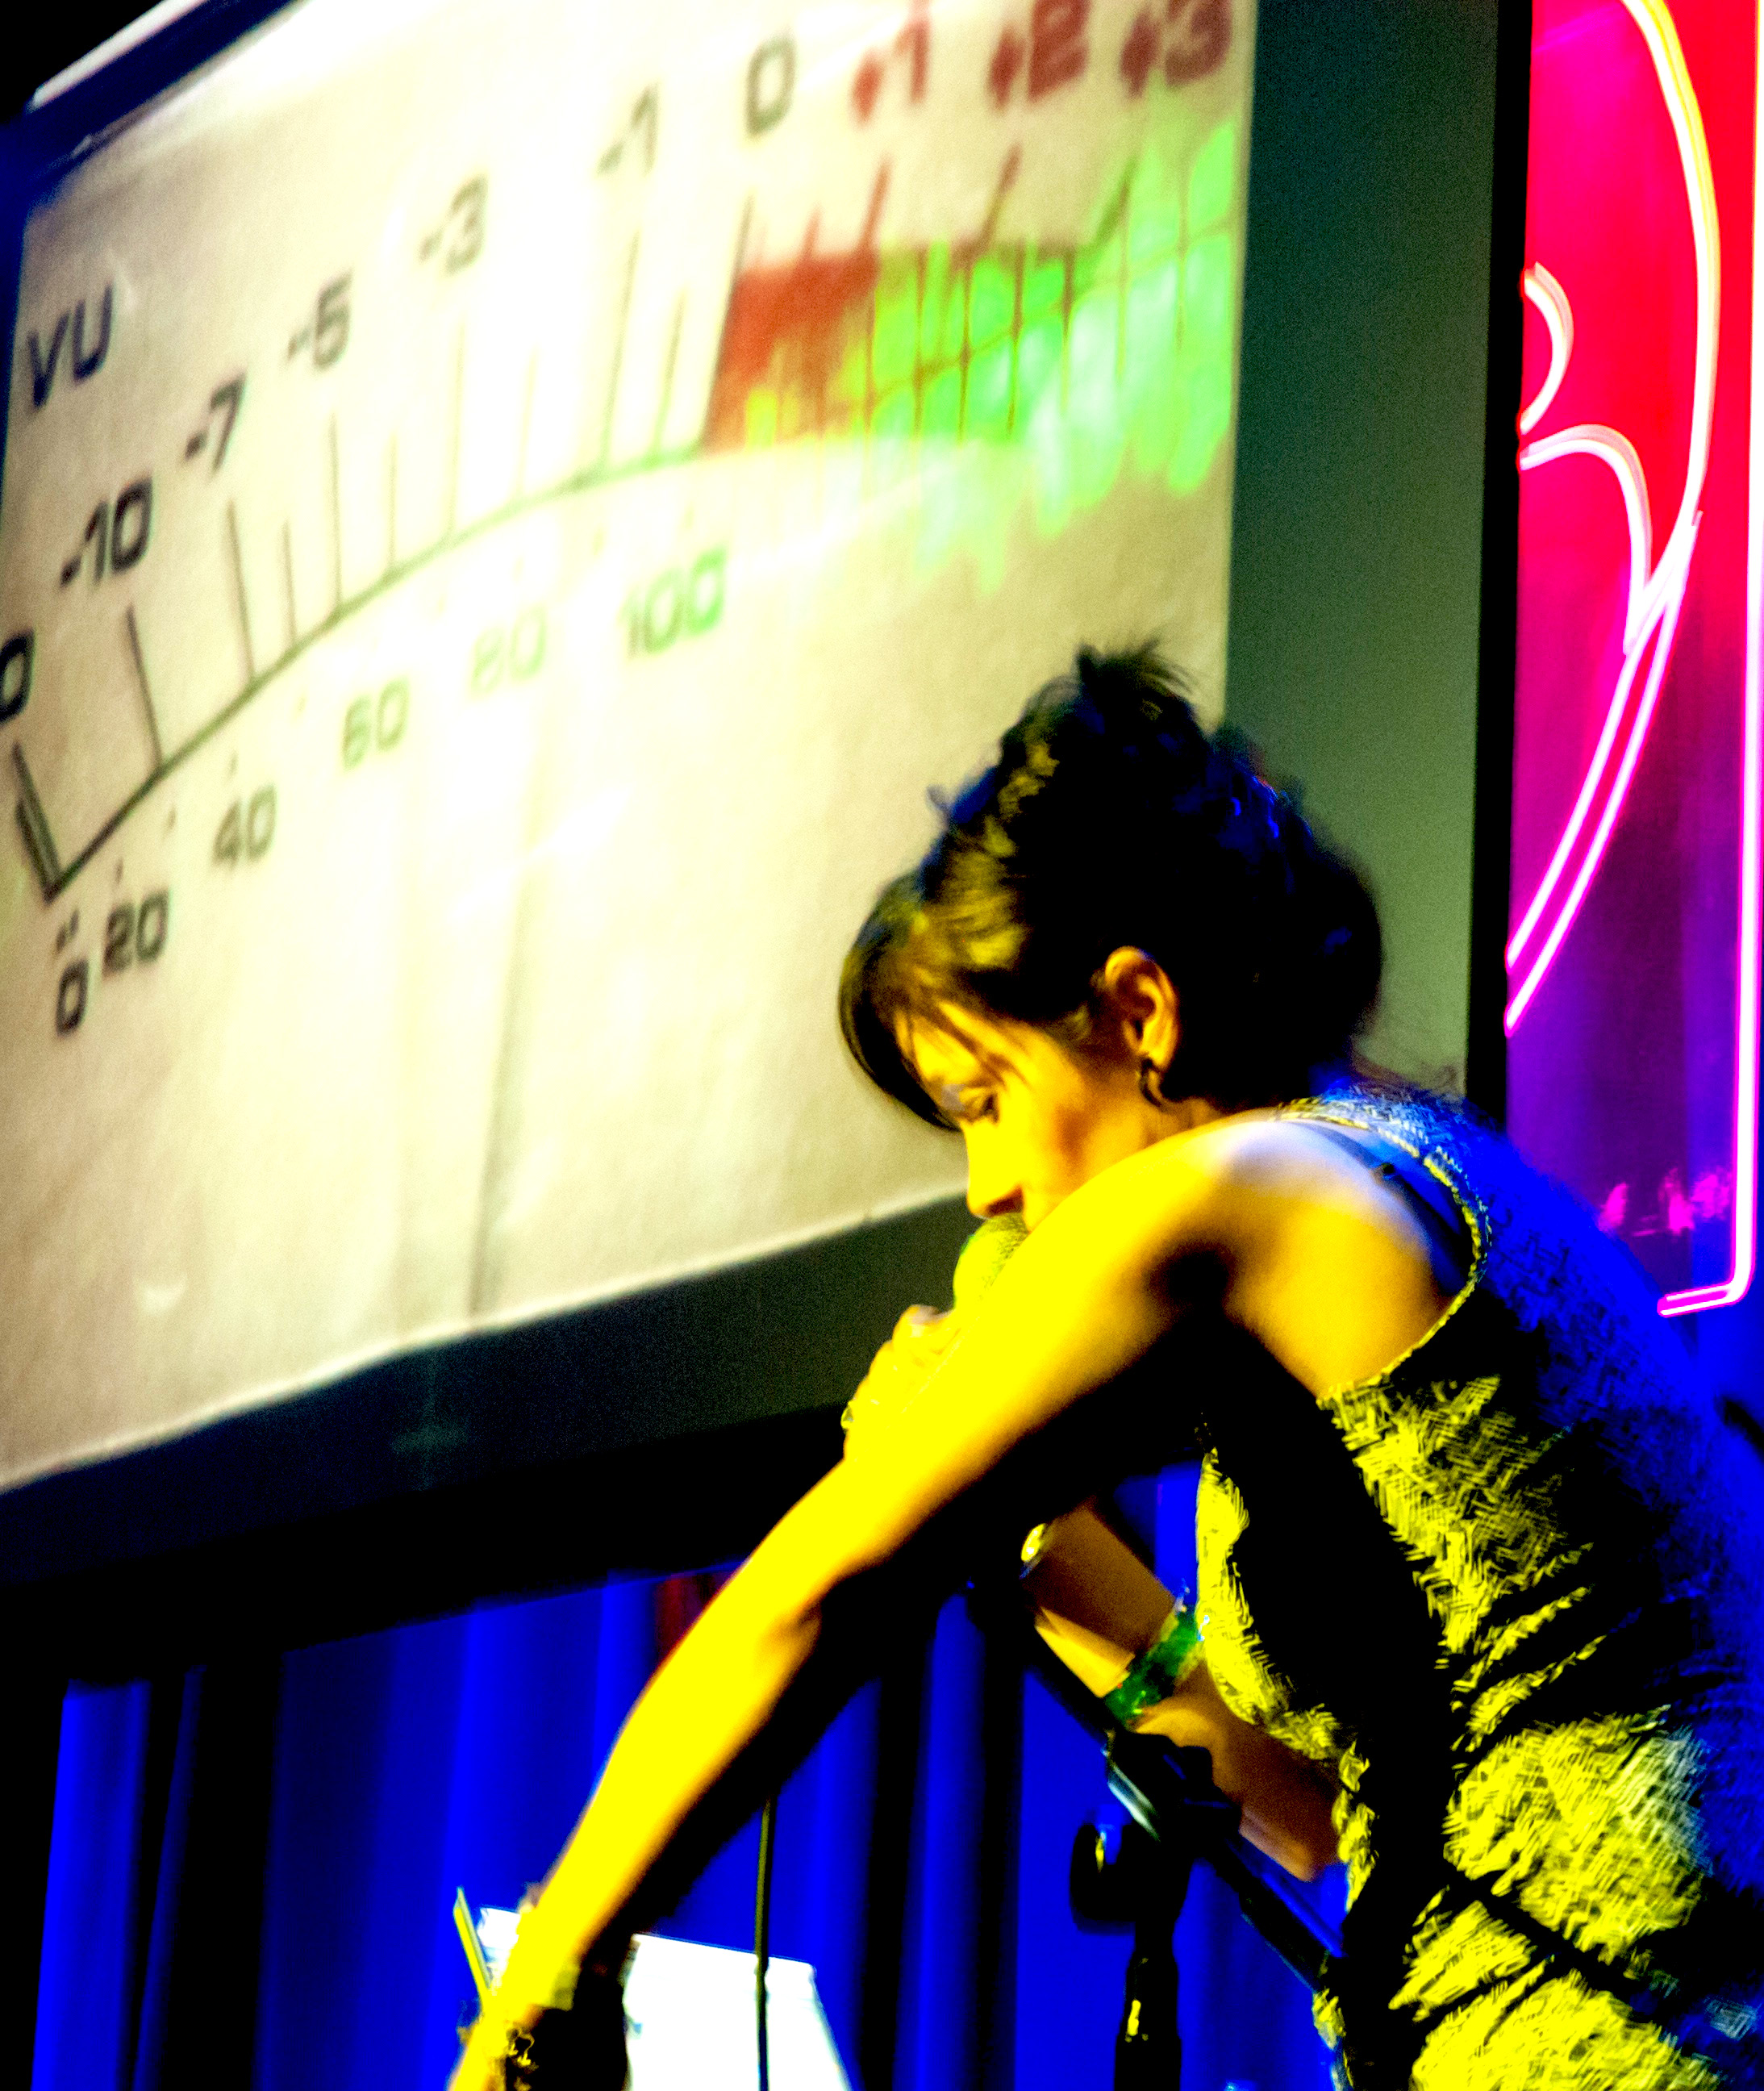 Caro C performing on stage. She is singing into a microphone she’s holding in her right hand. She is lit with a yellow light and is stood in front of a screen with a metre projected onto it, a neon light and a stage curtain.